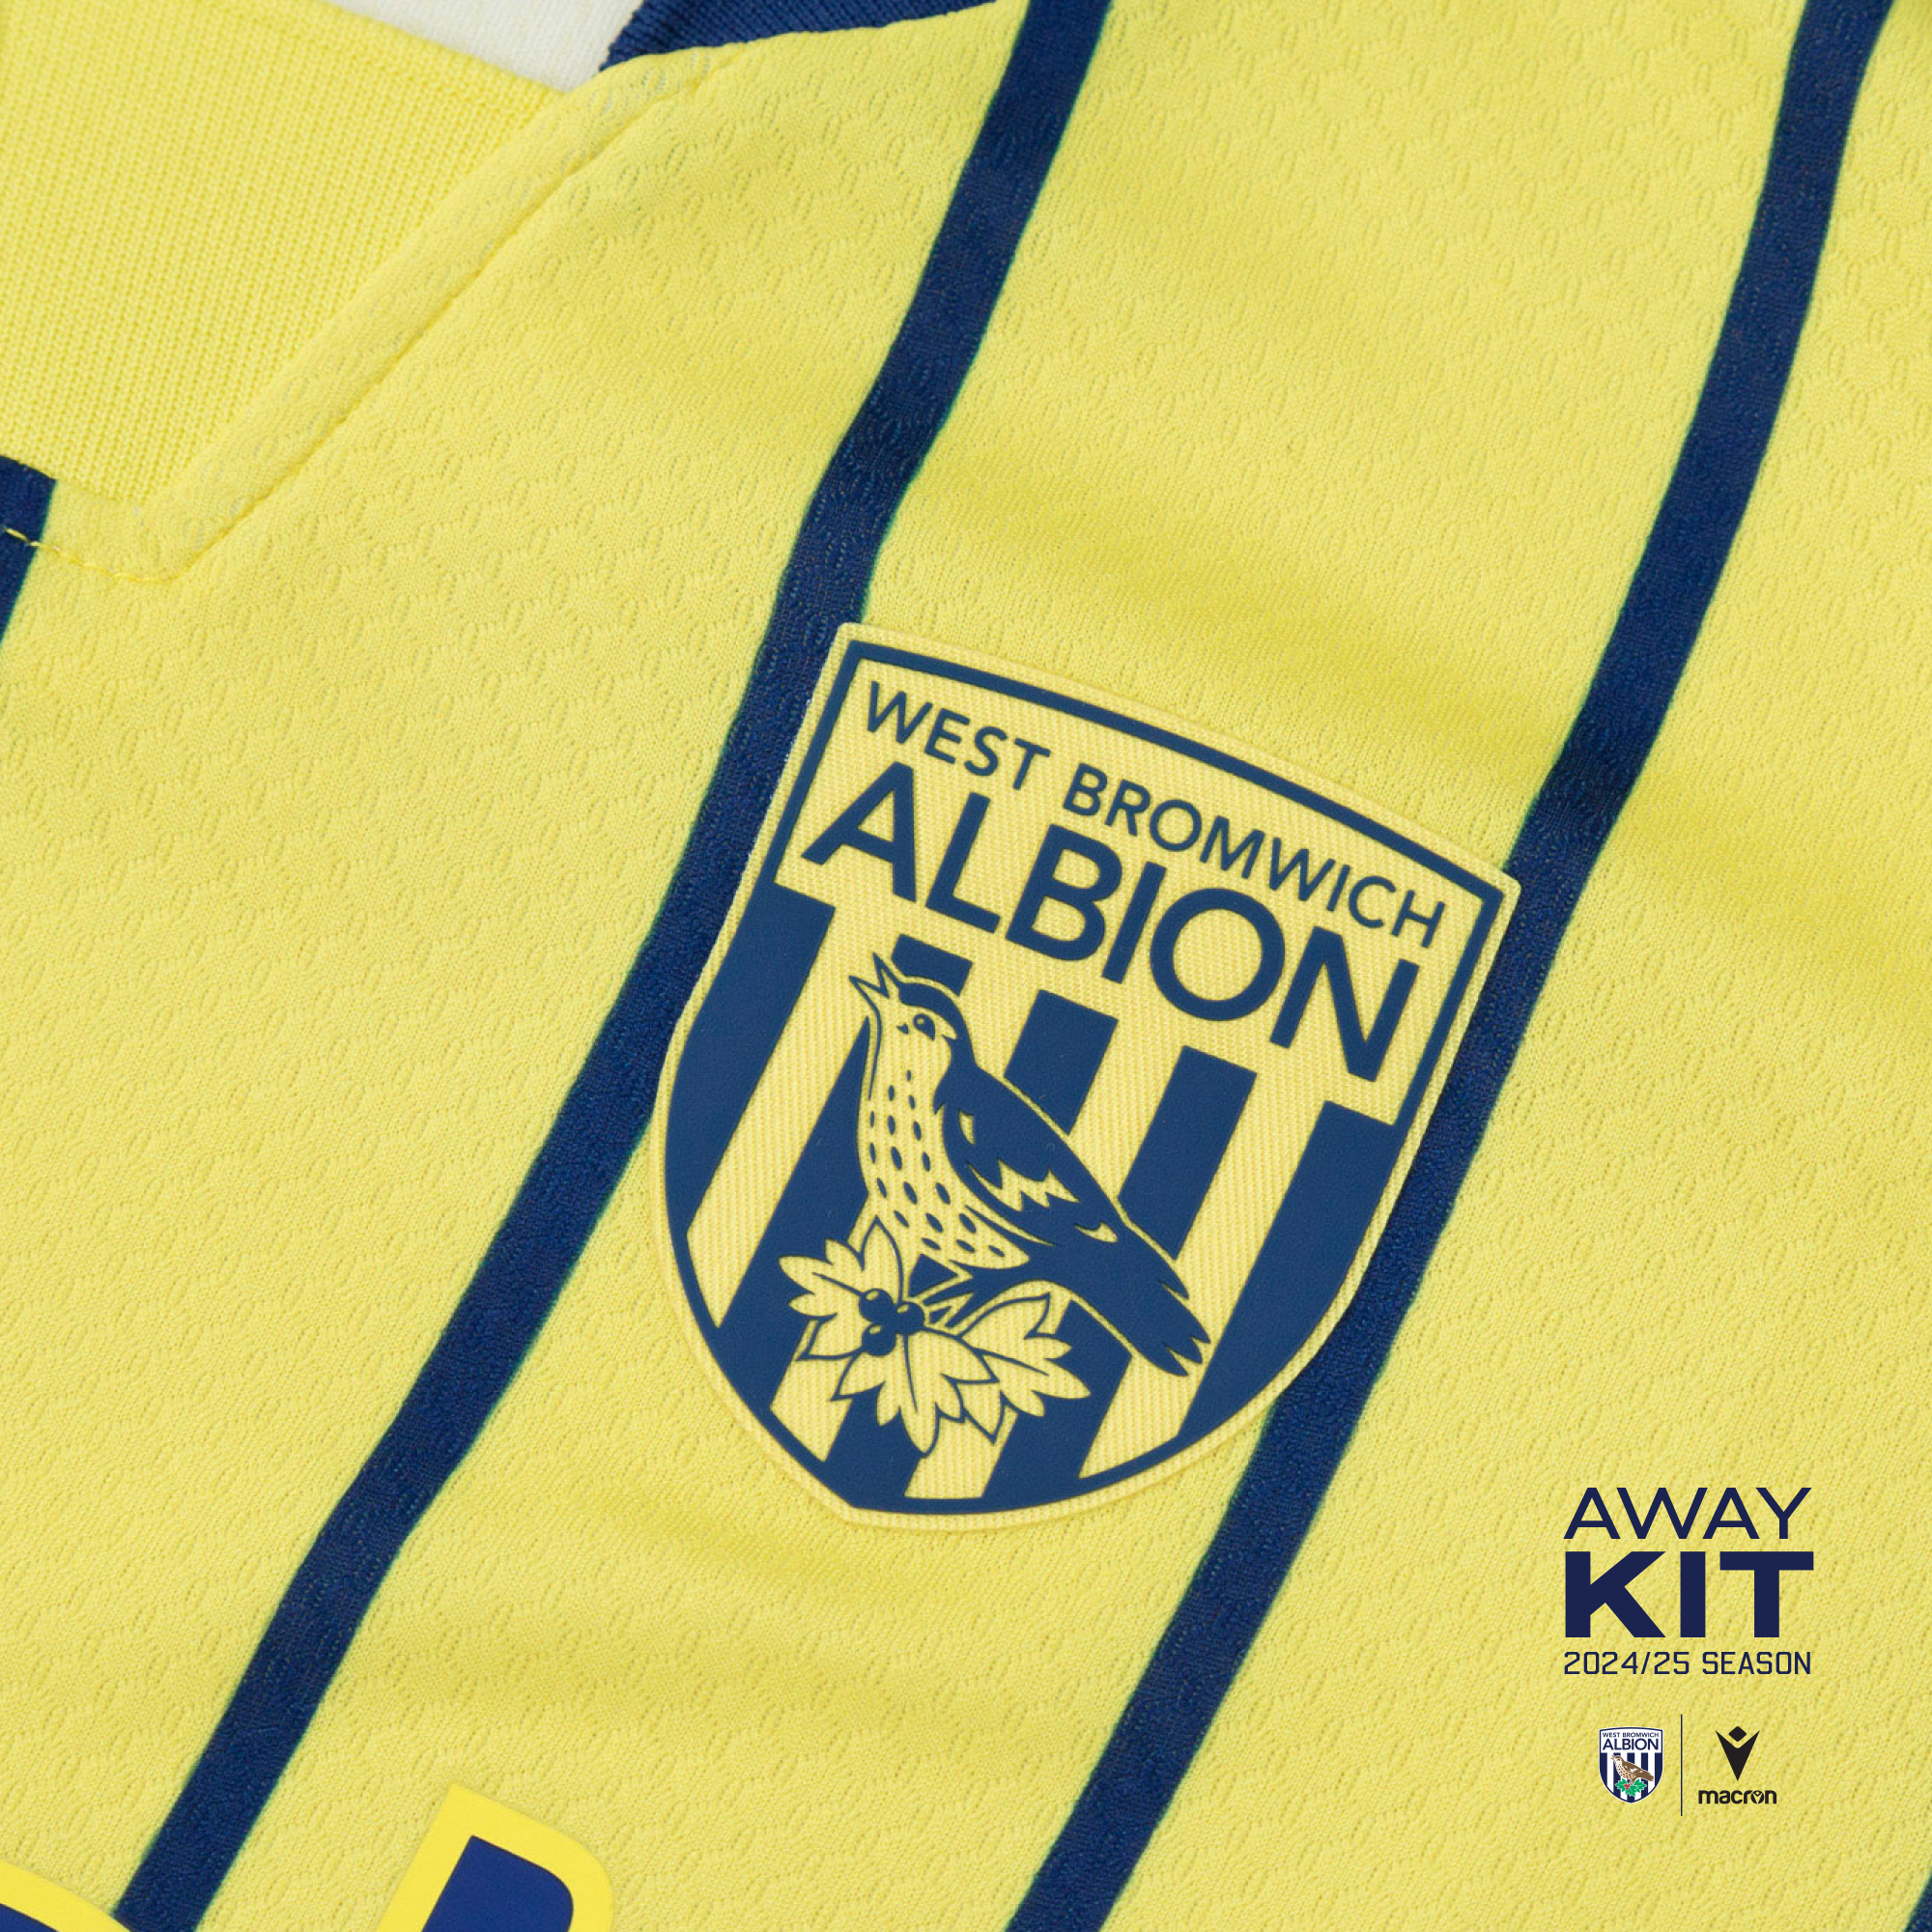 A close-up image of the 2024/25 away kit 